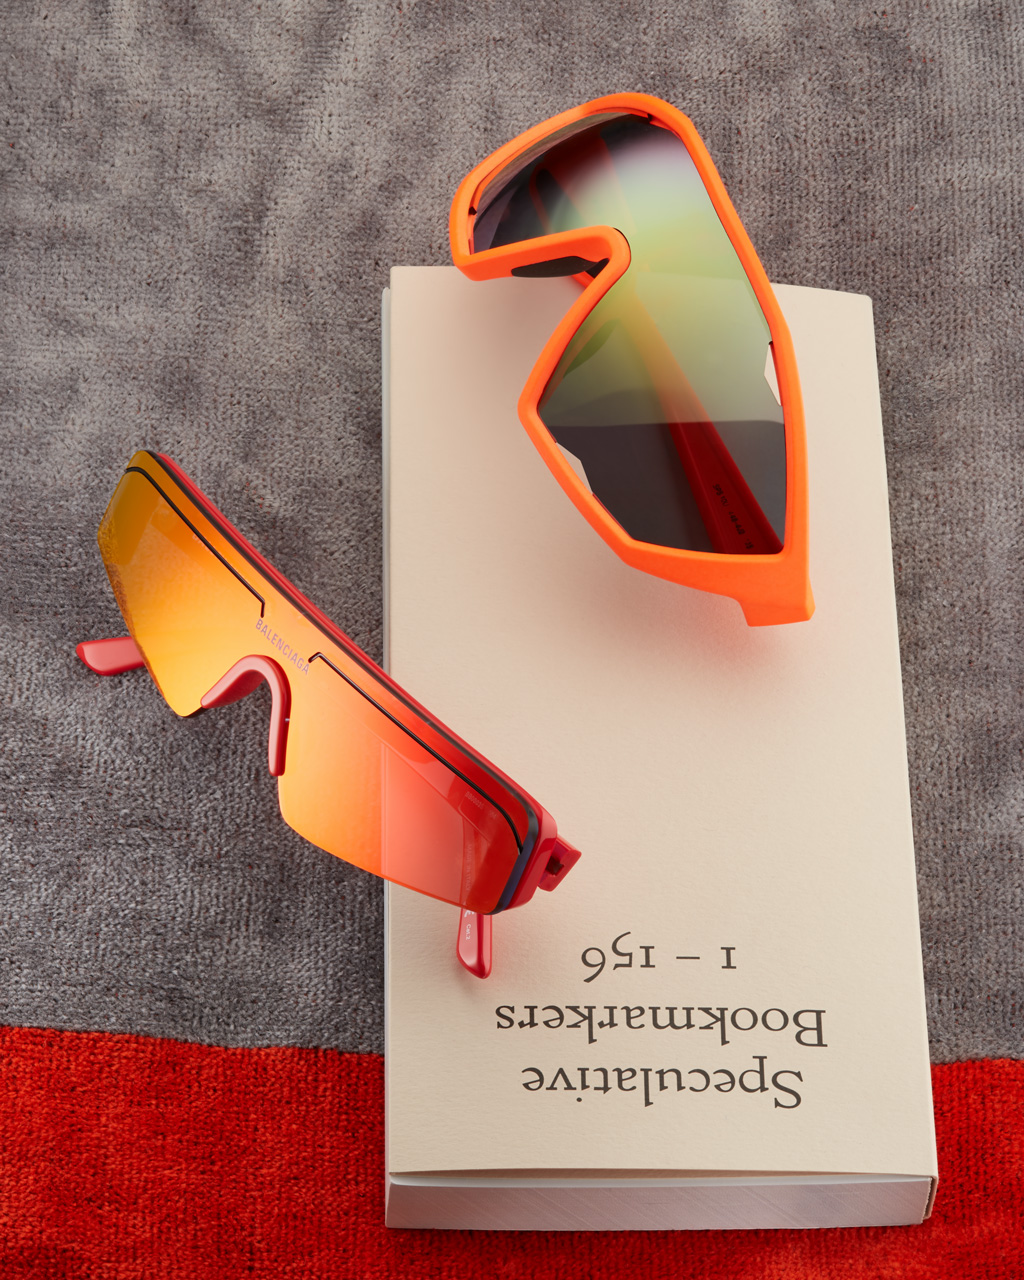 Light Up Any Look With Trending Sporty Sunnies